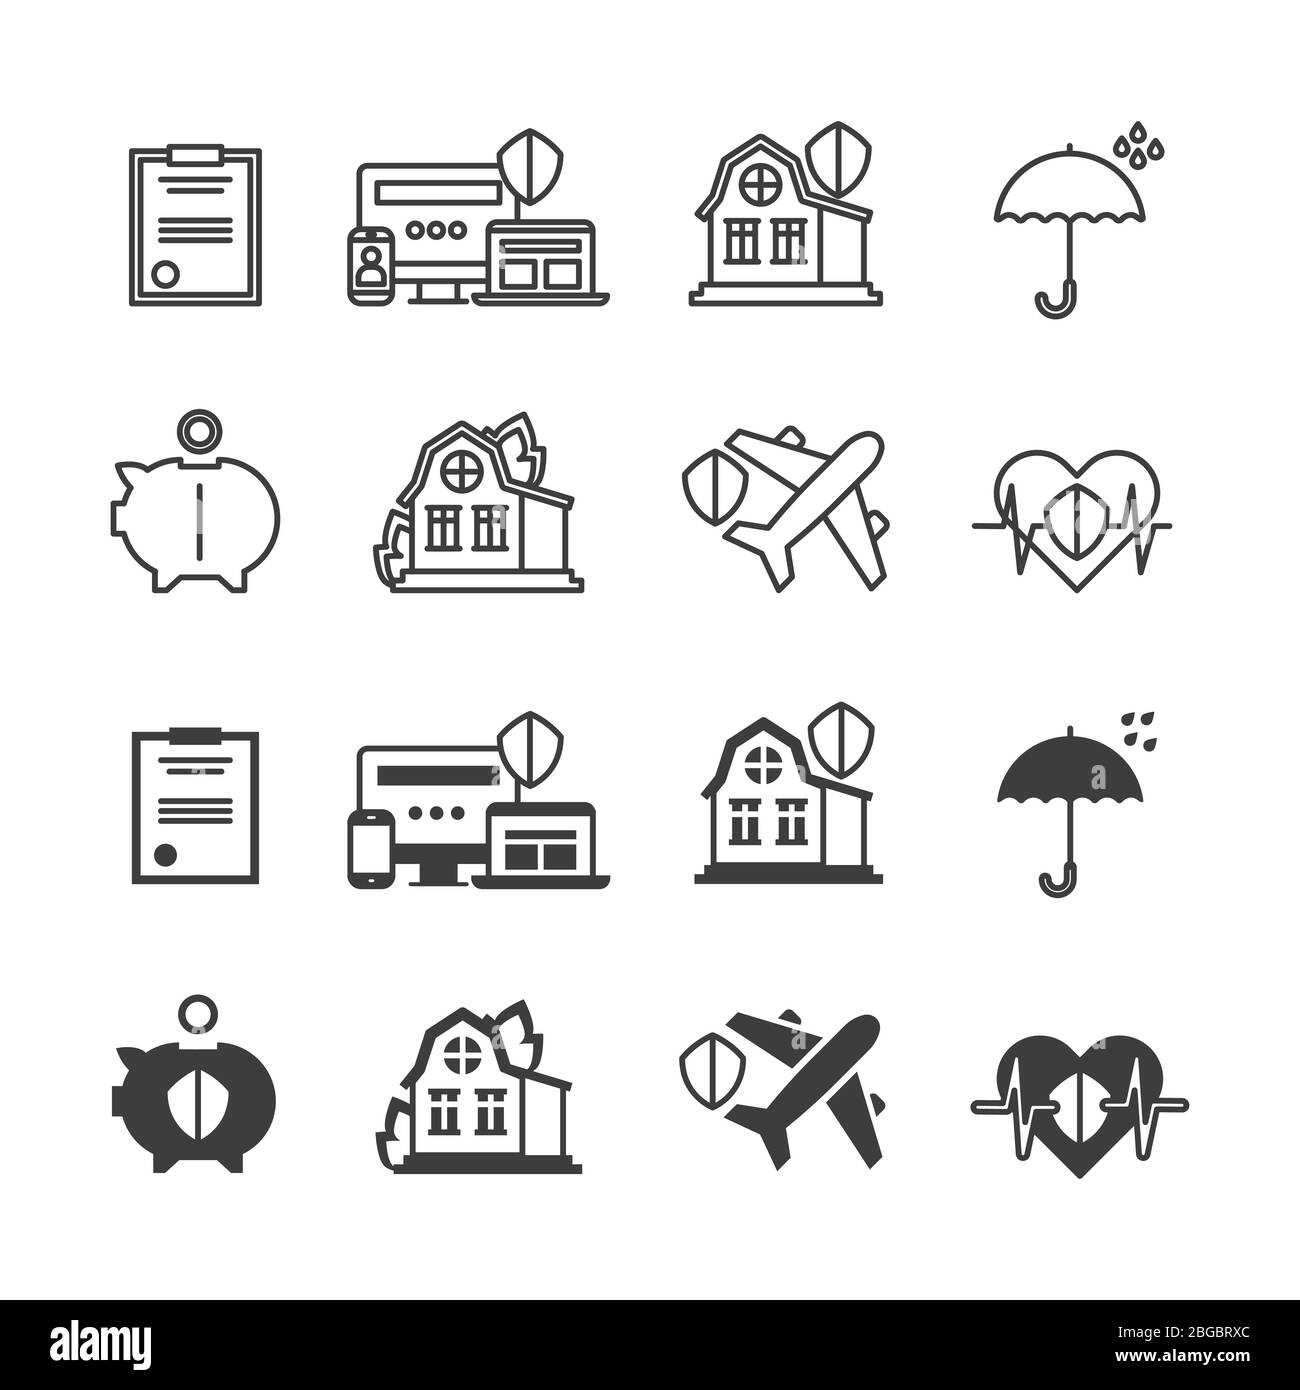 Life, house protection and safety line icons set. Vector illustration Stock Vector